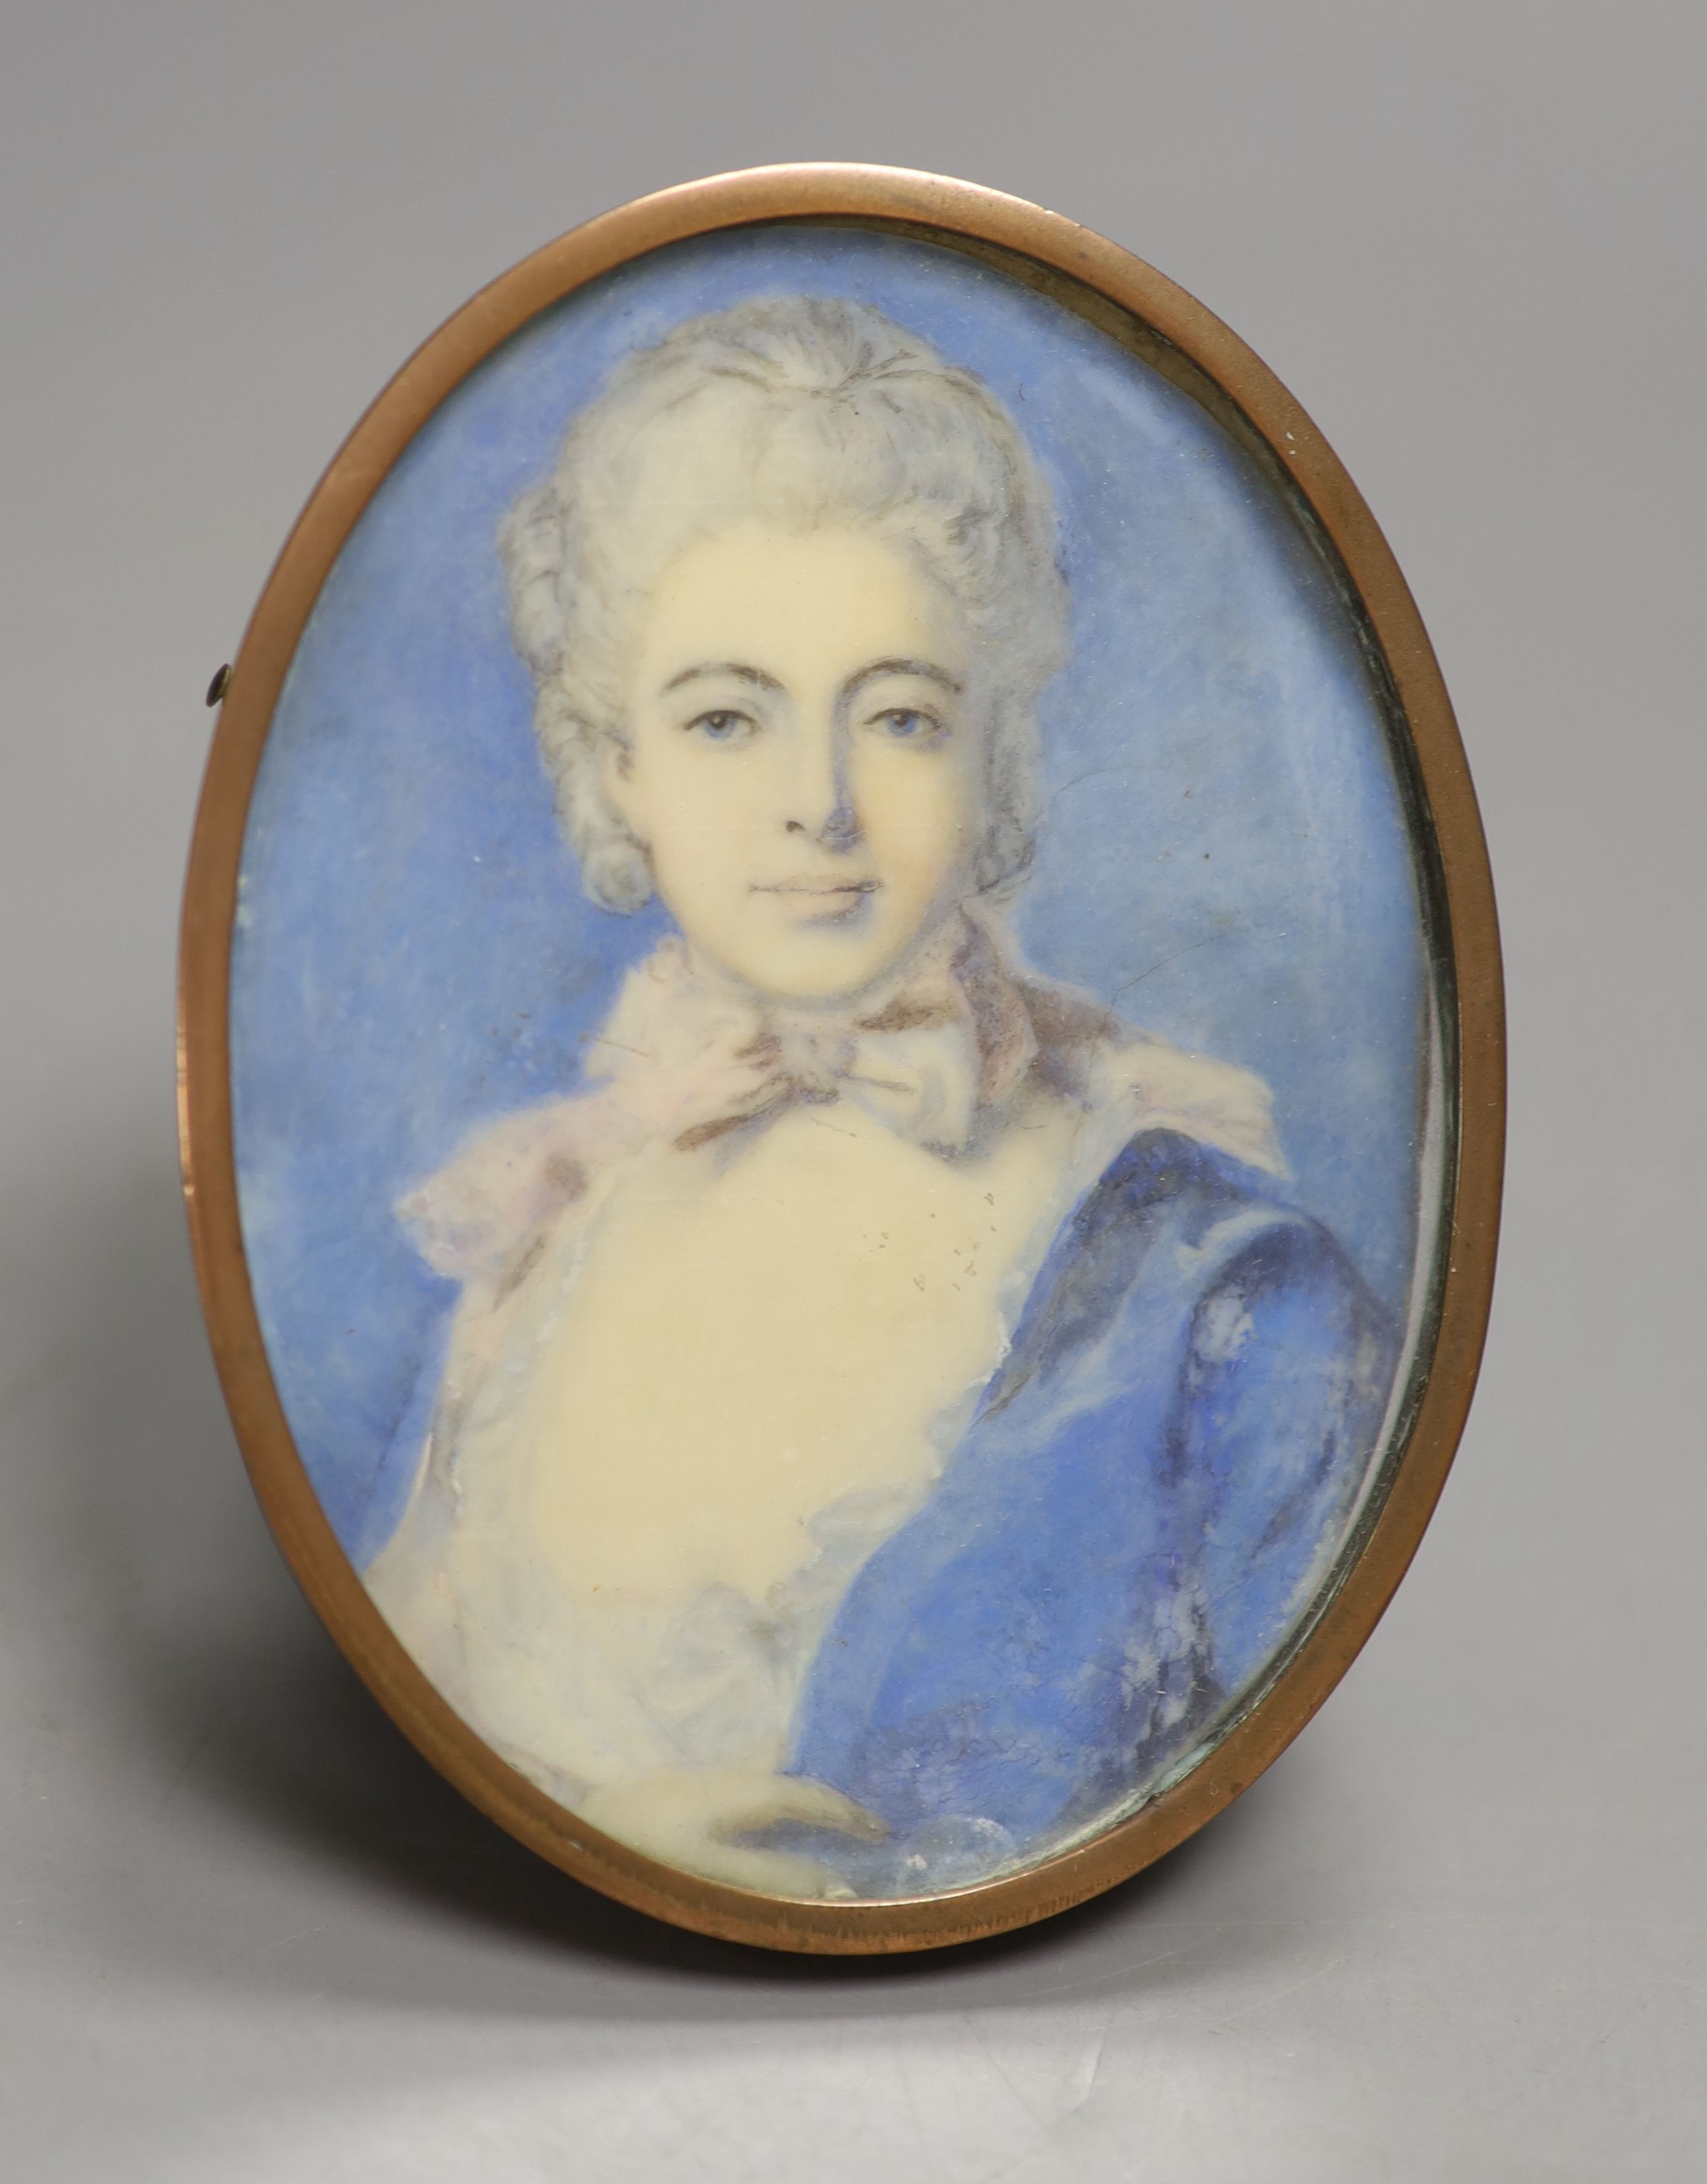 English School (early 19th century), watercolour on ivory, miniature portrait of a young lady with a bow at her neck, height 10cm